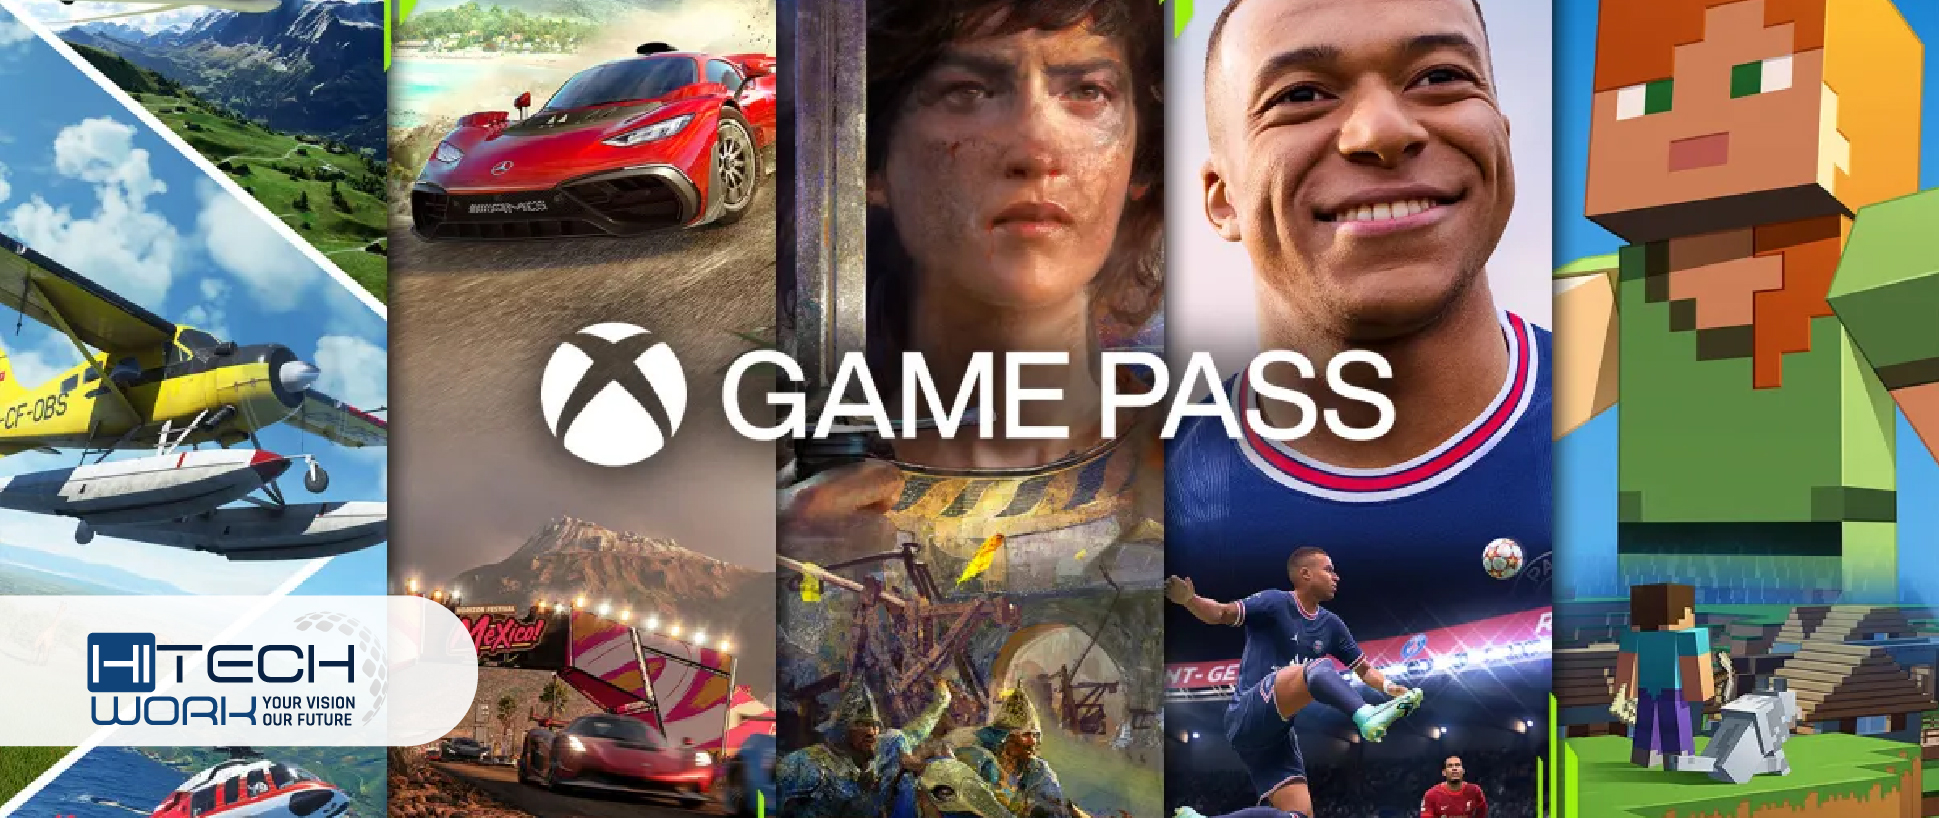 Xbox Game Pass Subscribers to Lose Five Amazing Games